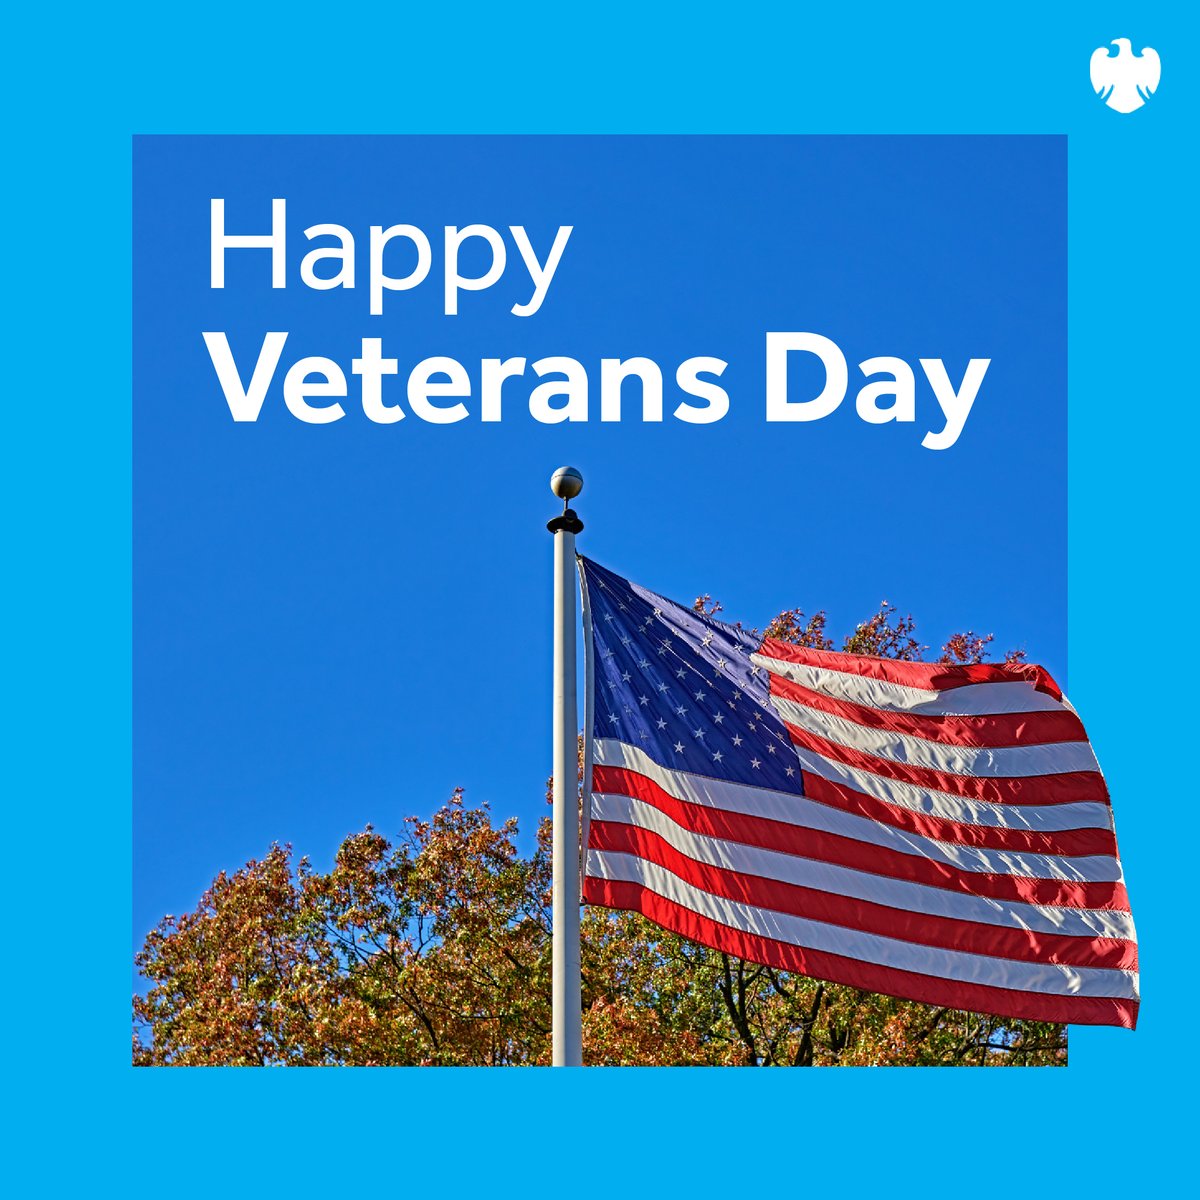 Today, we remember and honor our veterans. Thank you for your sacrifice and service to our country.